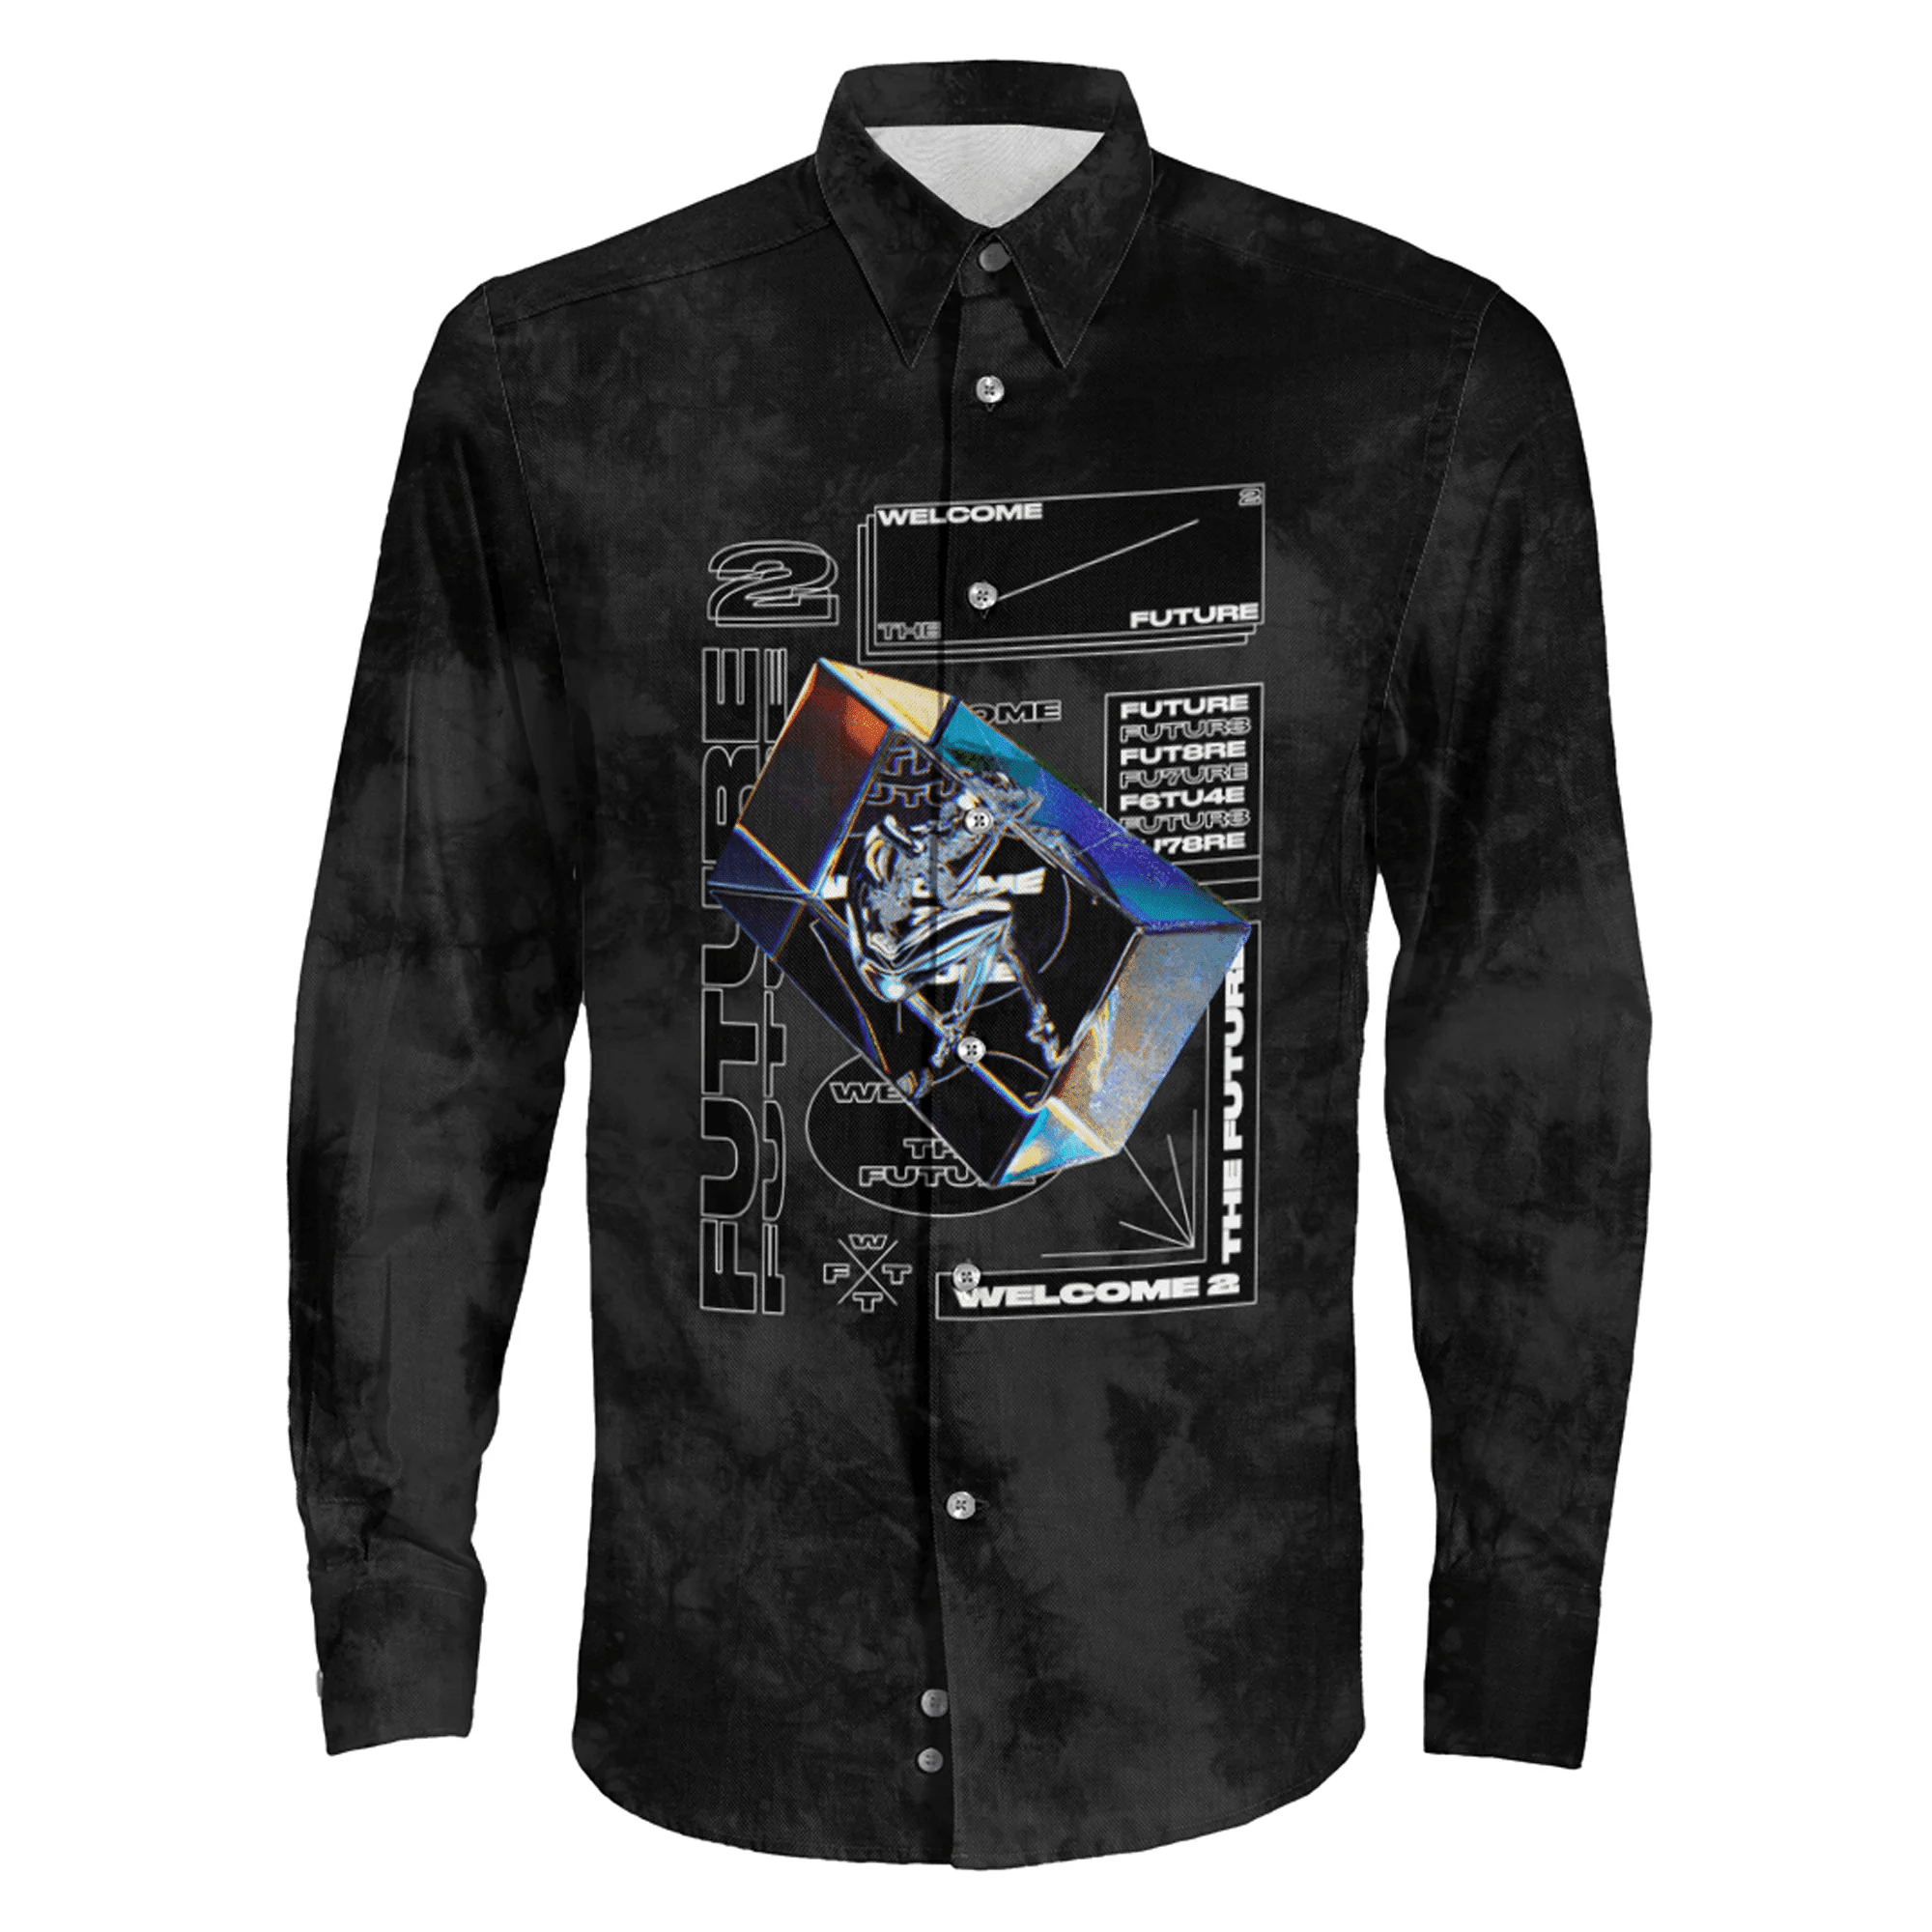 1sttheworld Clothing - Welcome to Future - Long Sleeve Button Shirt A7 | 1sttheworld